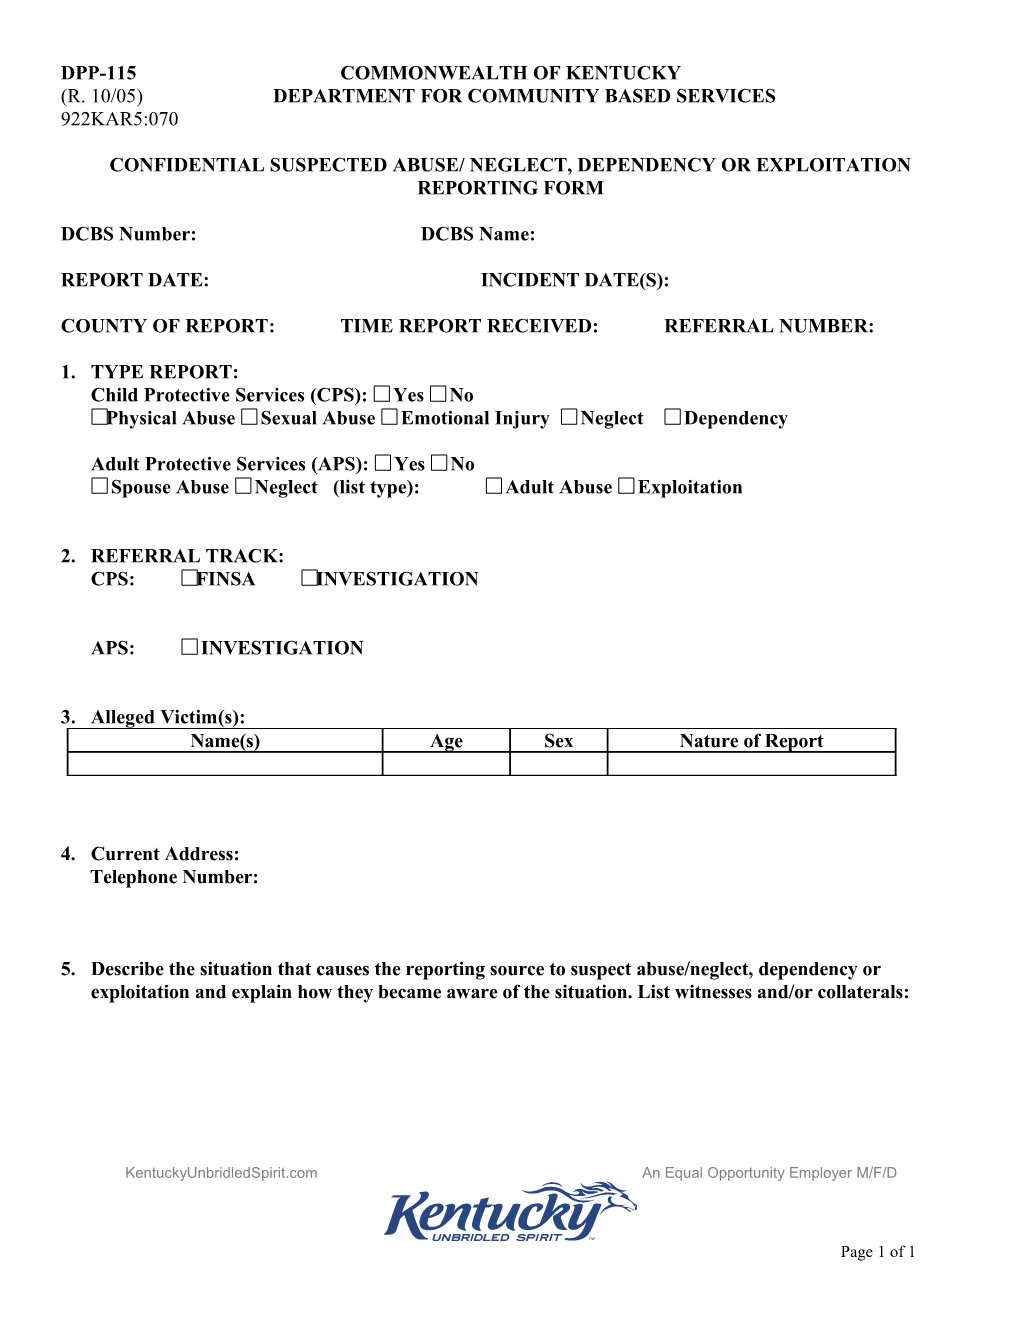 Confidential Suspected Abuse/ Neglect, Dependency Or Exploitation Reporting Form